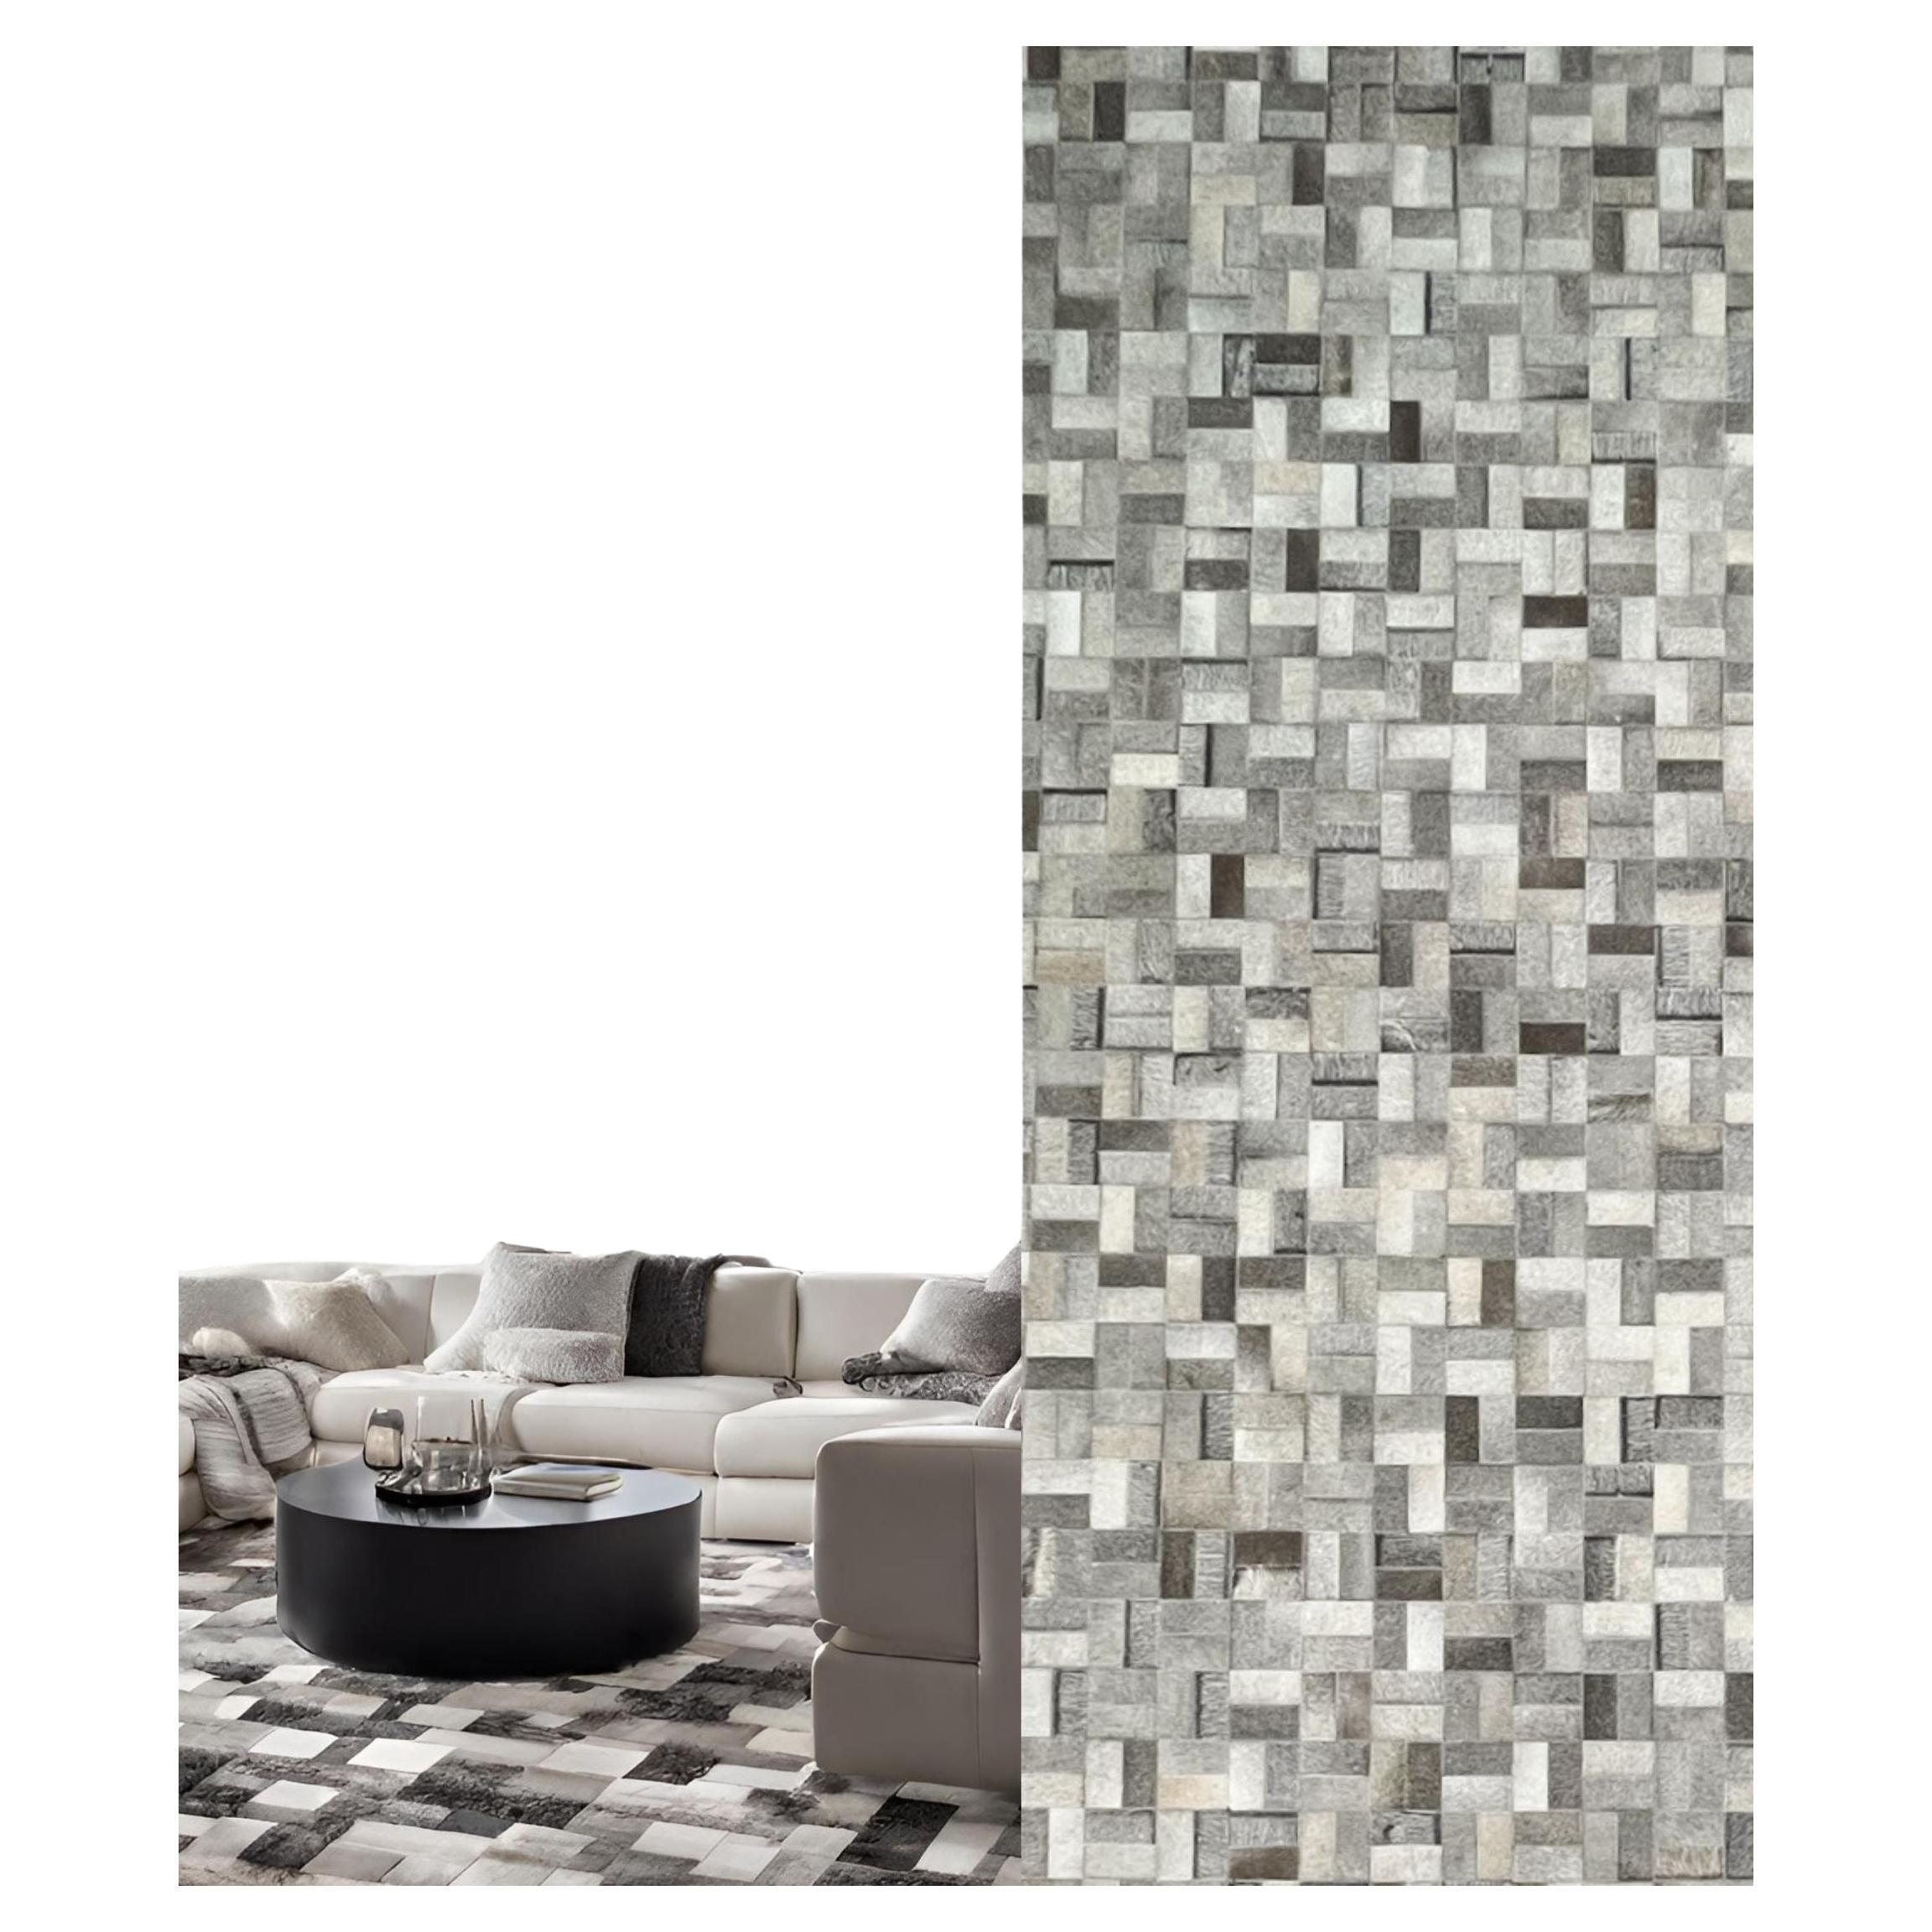 Handmade Luxury Gray Mosaic Rug. Hair-on-hide Patchwork - Columbus Day Auction! For Sale